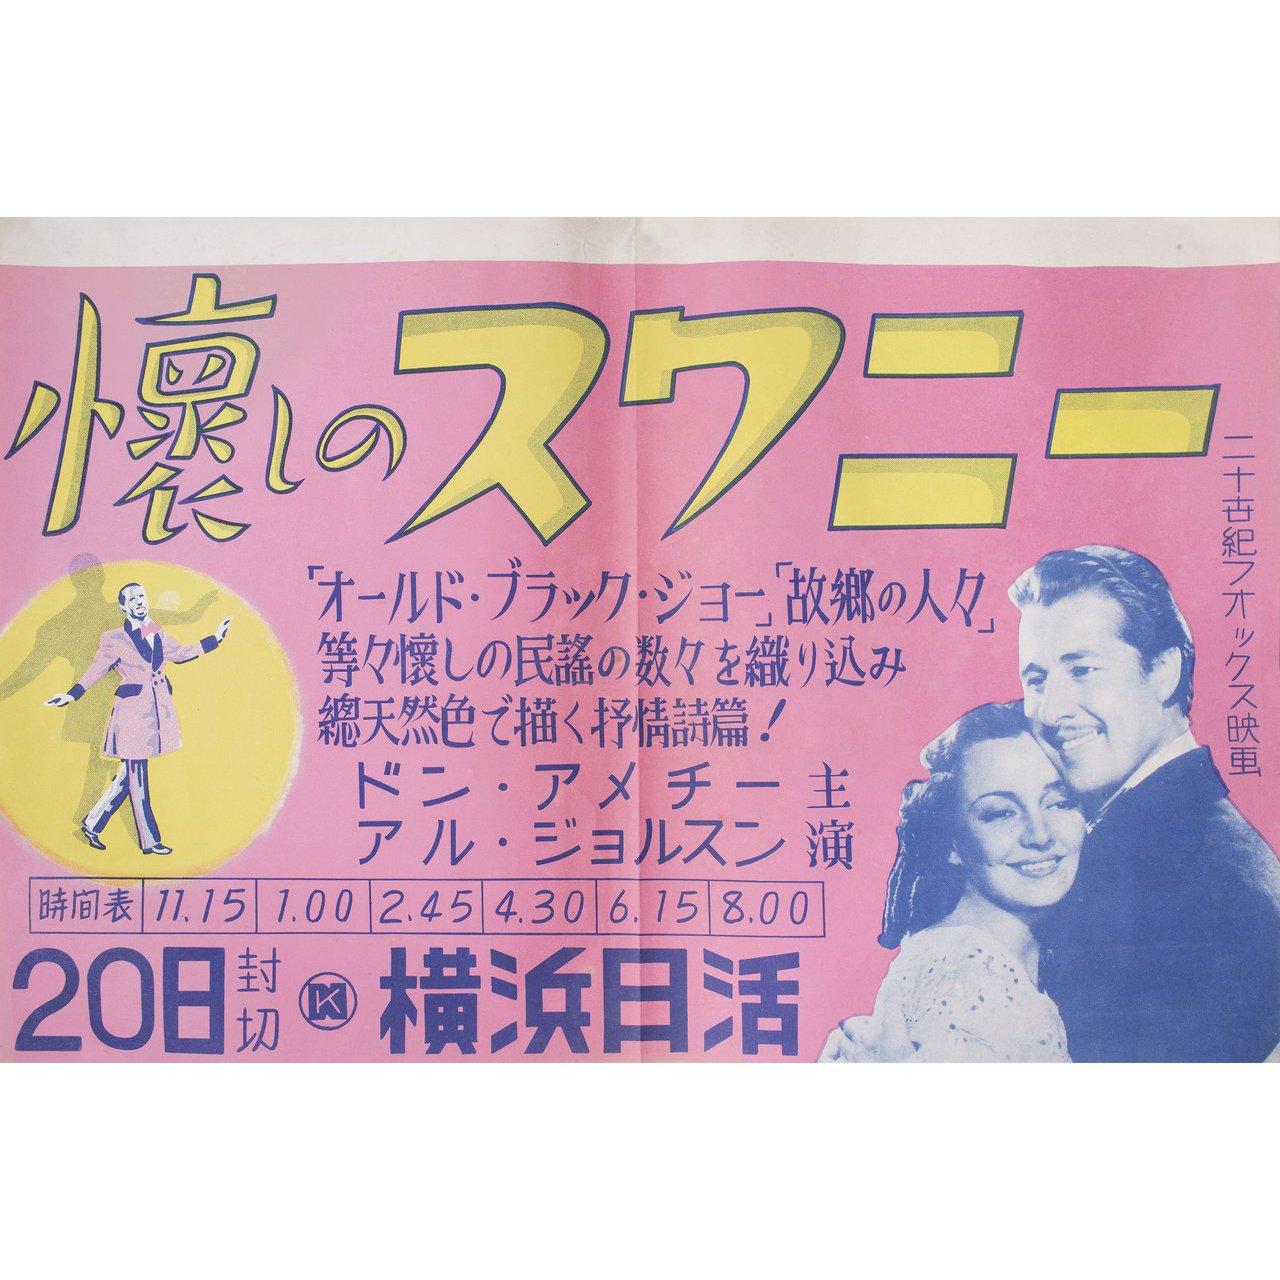 Original 1940s Japanese B3 poster for the first Japanese theatrical release of the film ‘Swanee River’ directed by Sidney Lanfield with Don Ameche / Andrea Leeds / Al Jolson / Felix Bressart. Very good-fine condition, folded. Many original posters